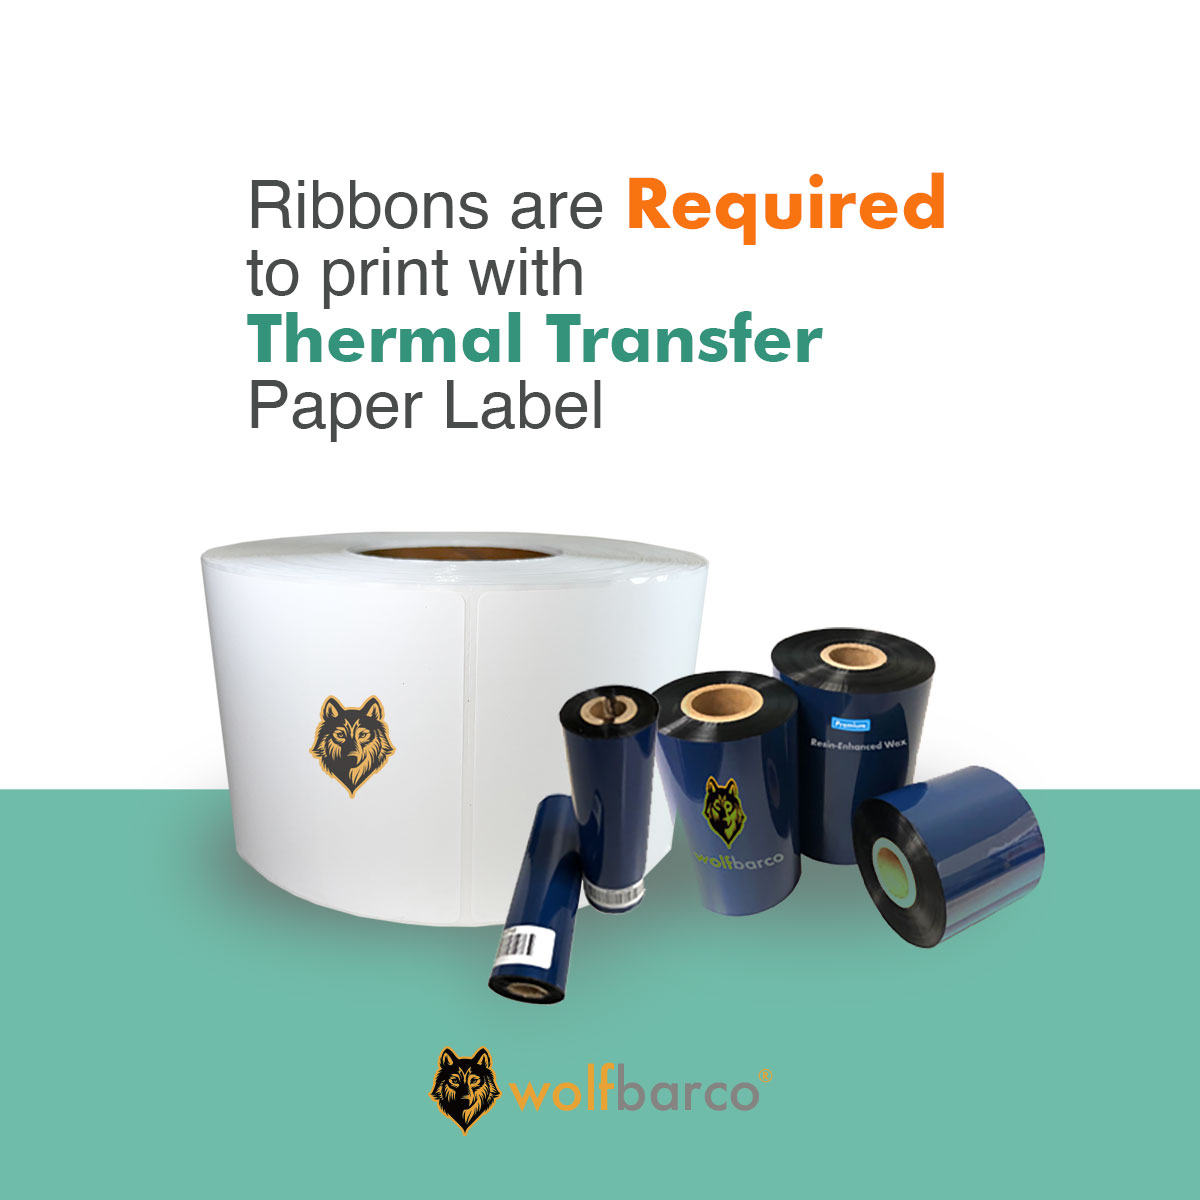 thermal transfer paper label requires ribbon